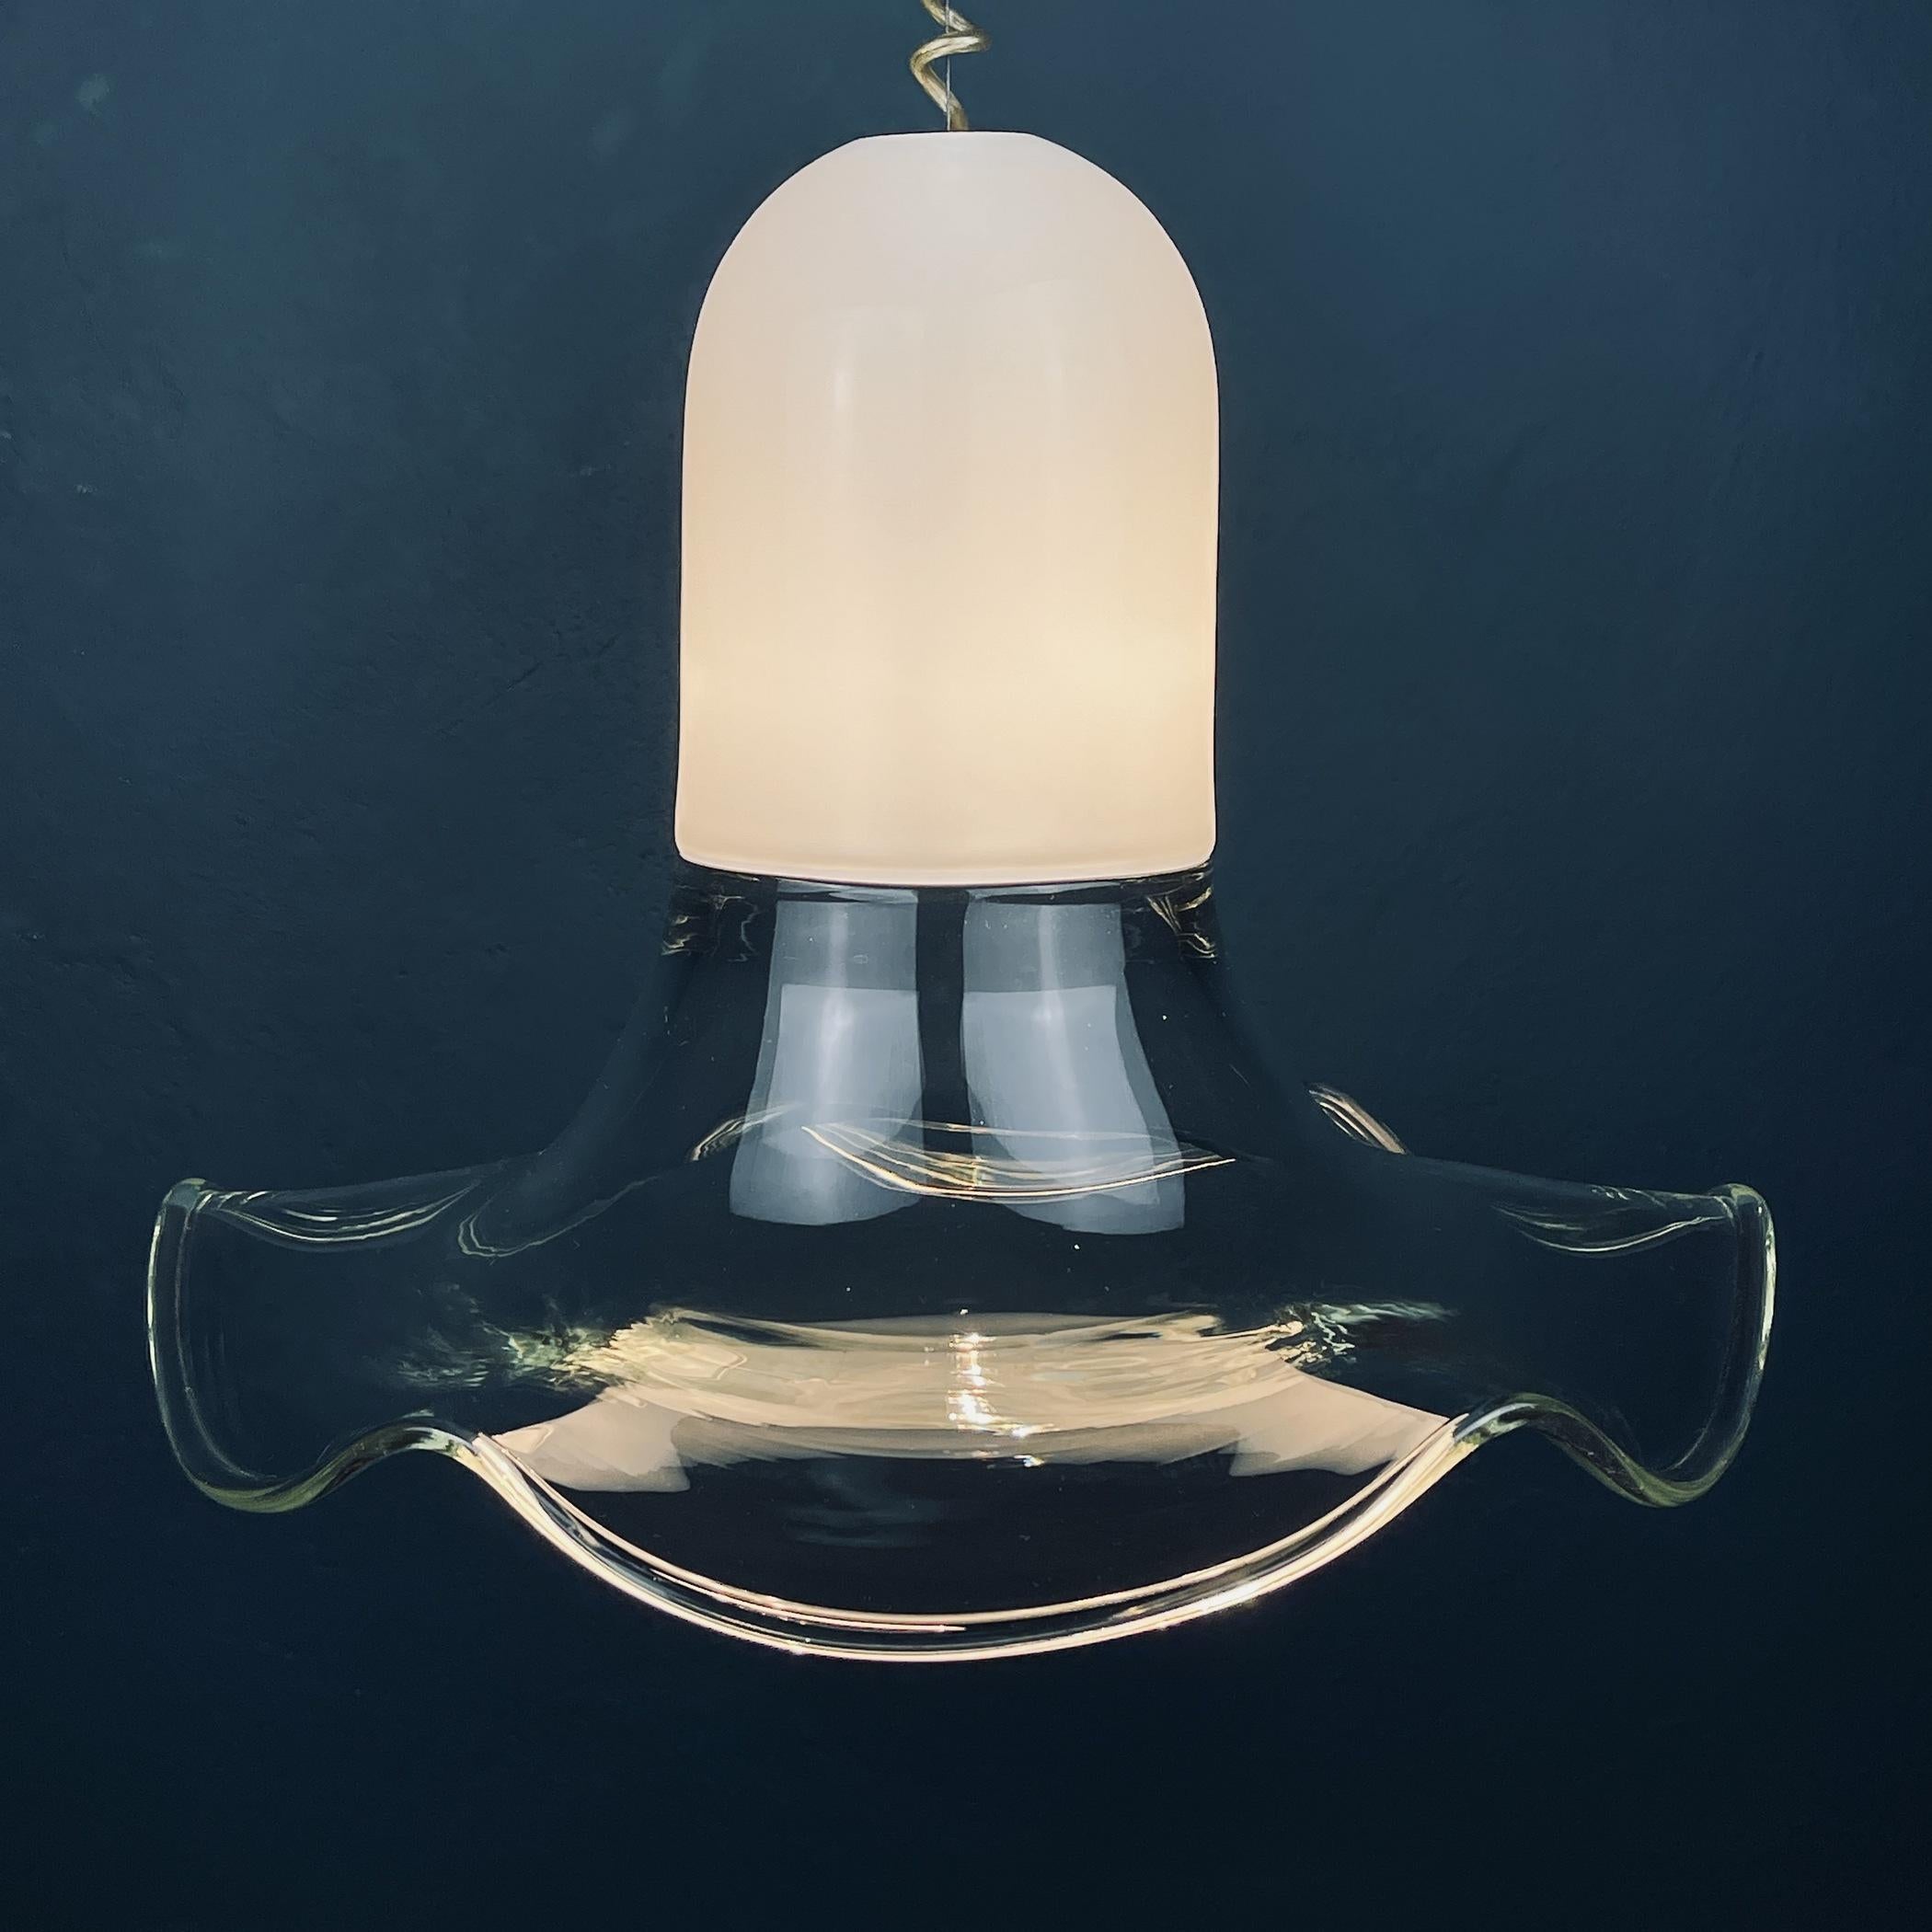 Unusually beautiful murano glass chandelier by Roberto Pamio & Renato Toso for Leucos made in Italy in the 70s. Elegant and graceful, the chandelier seems to float in the air. Perfect vintage condition. No chips or cracks. Requires a standard Edison